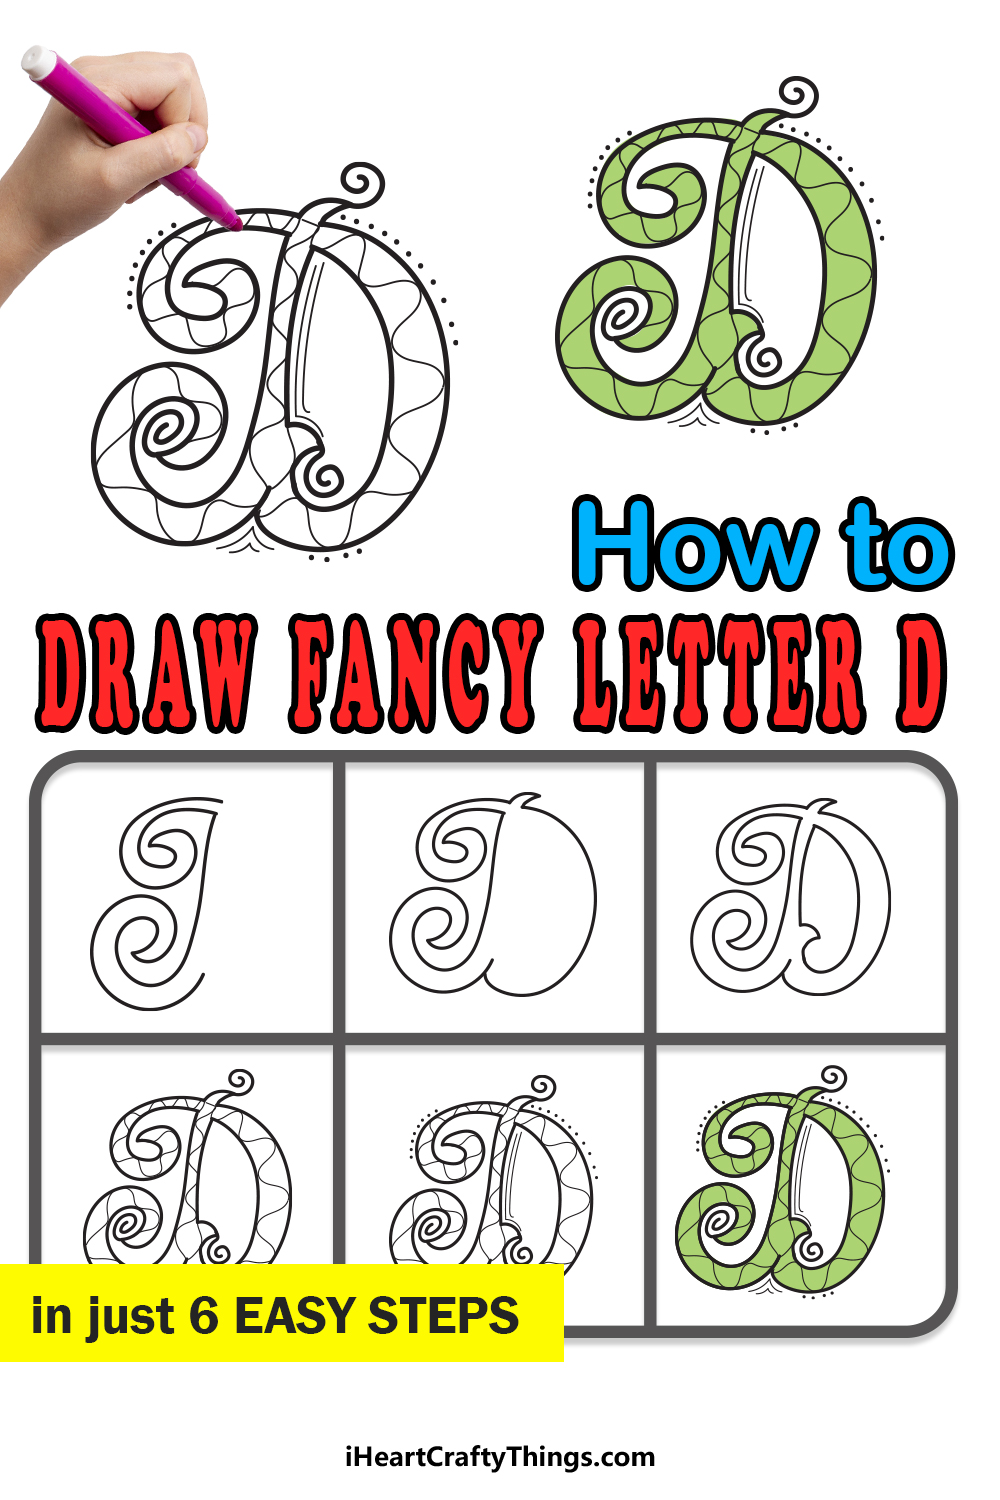 How To Draw Your Own Fancy D step by step guide